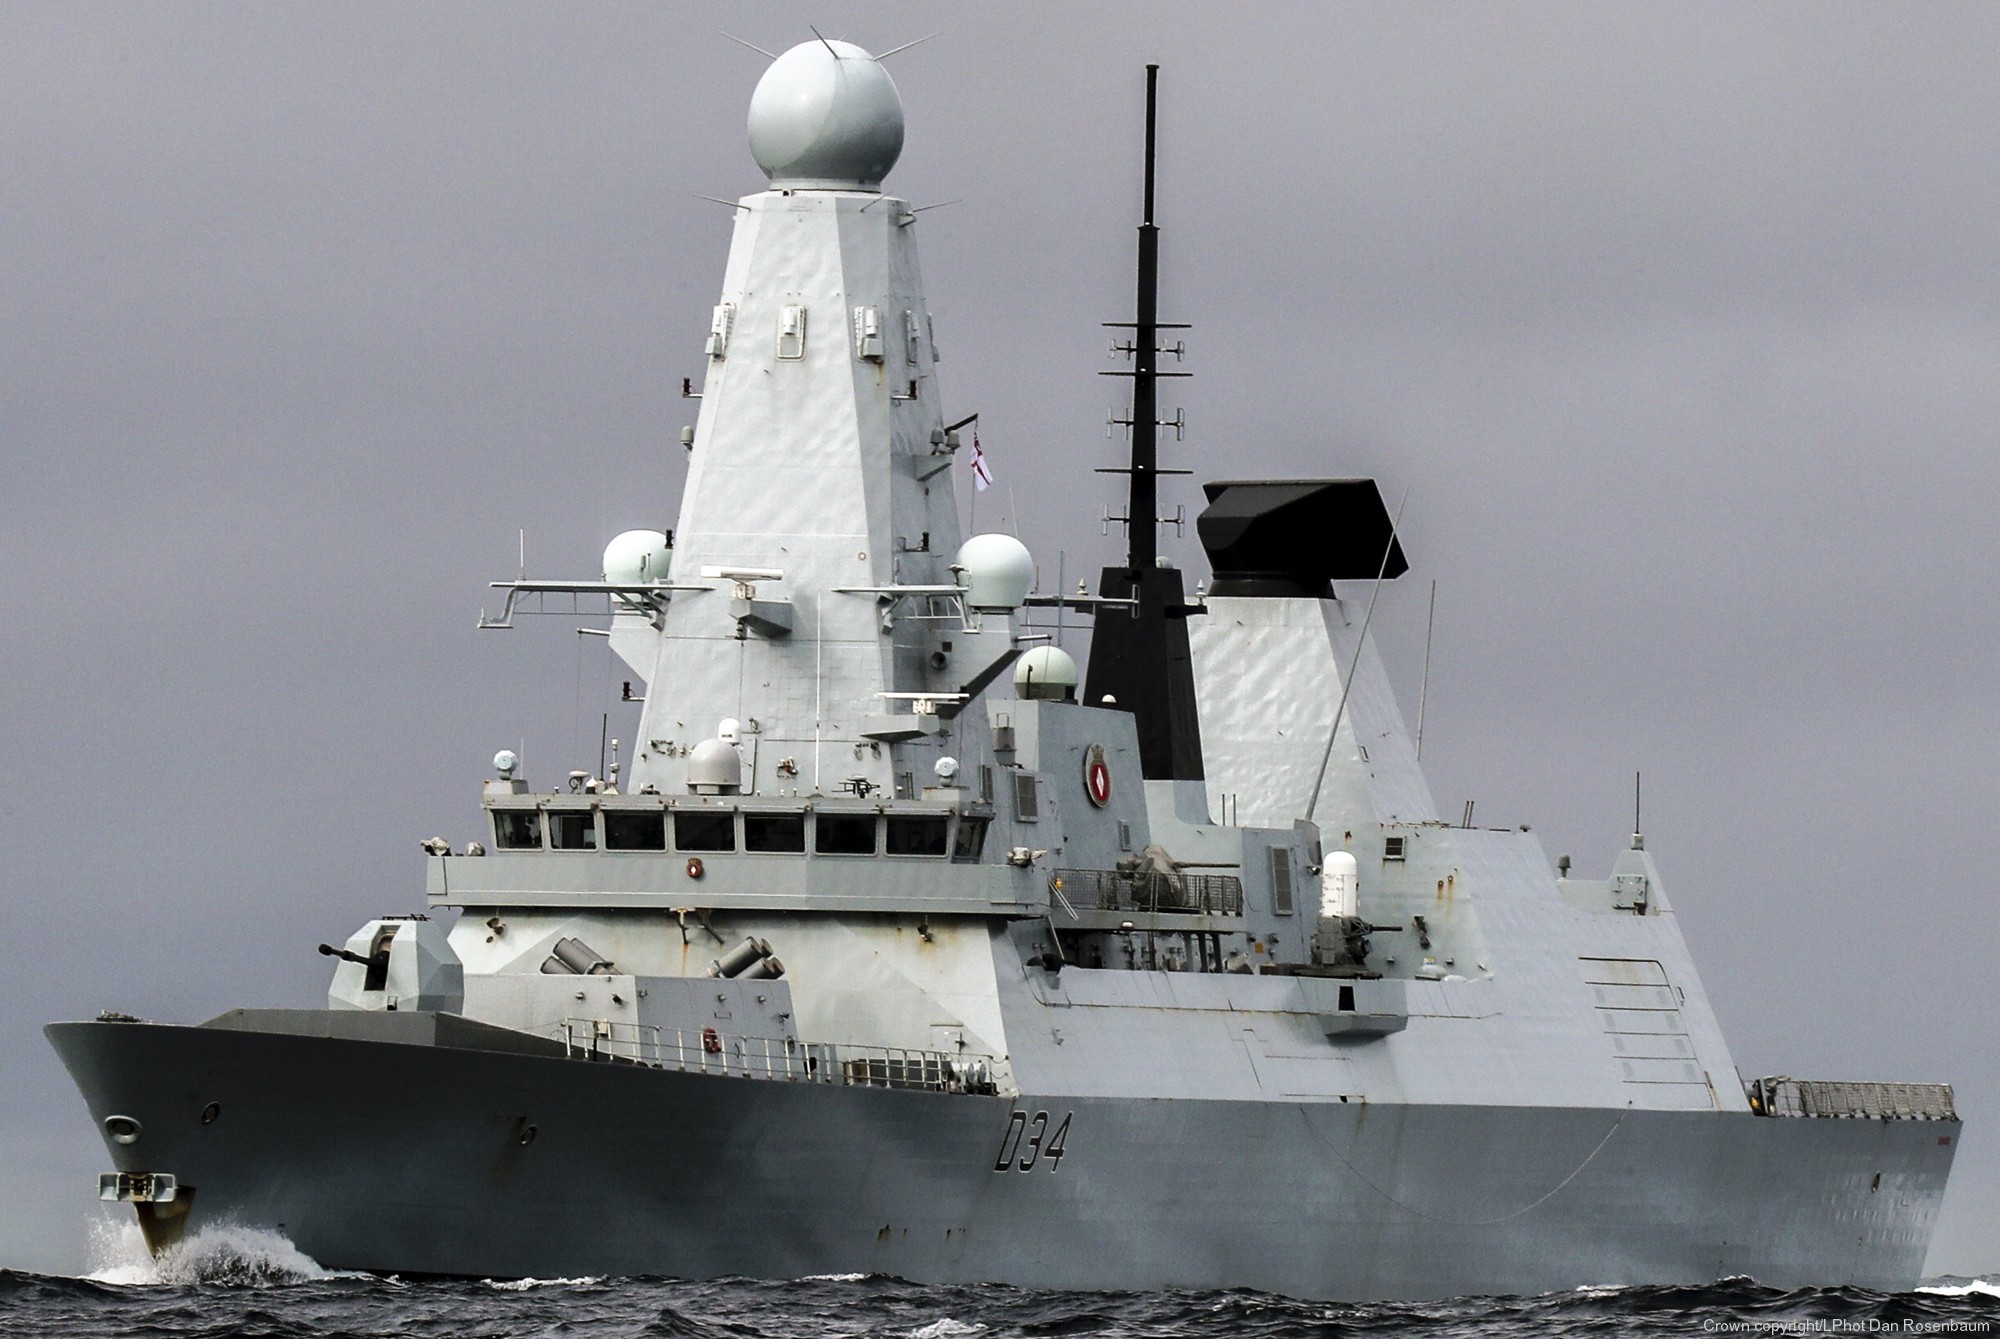 d34 hms diamond d-34 type 45 daring class guided missile destroyer ddg royal navy sea viper paams 48